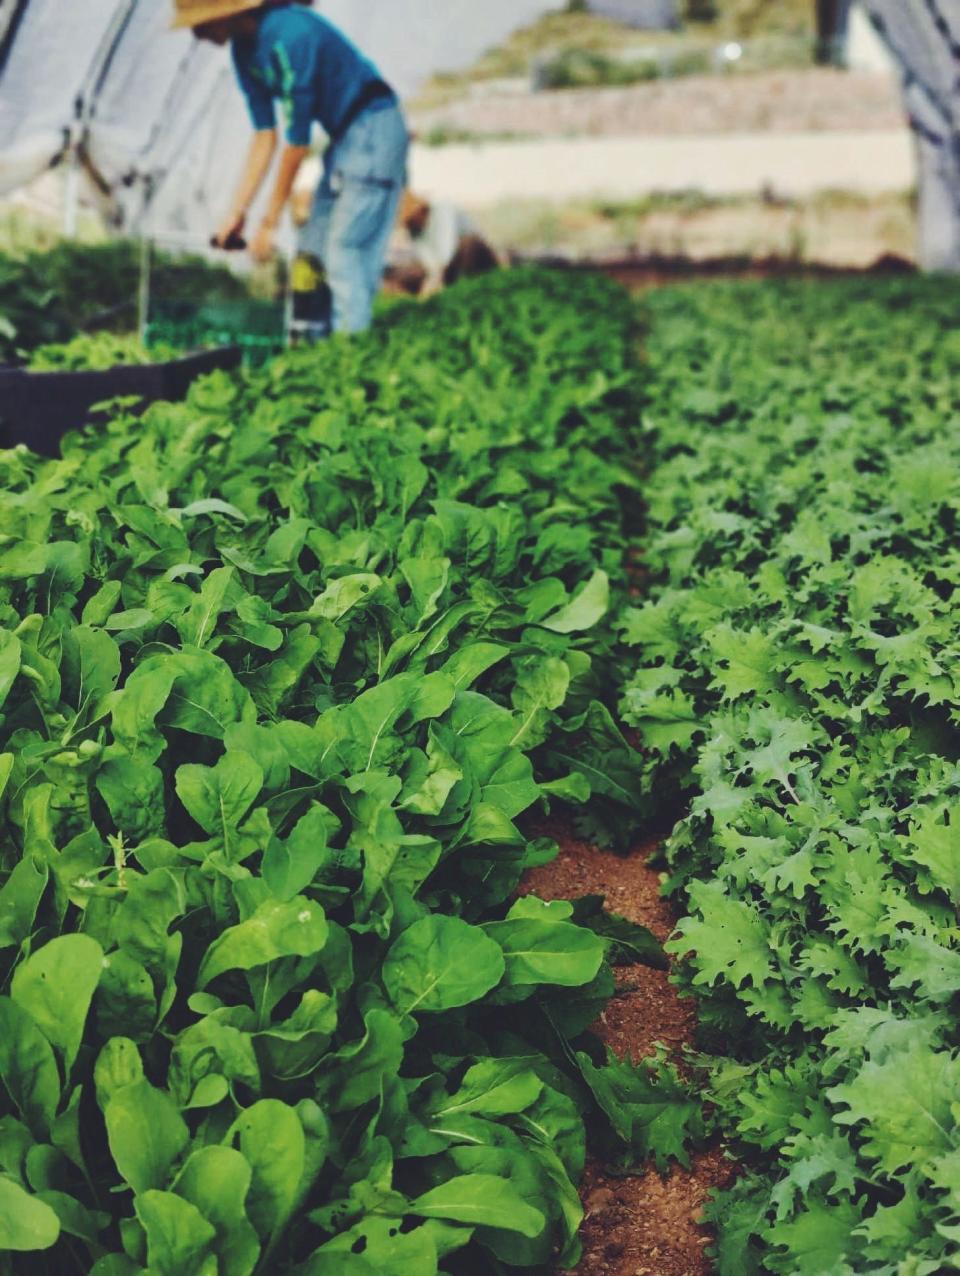 A worker tends over a bed of baby arugula and kale in Roserbird Farms, a Certified Naturally Grown farm in Kingman, Arizona.